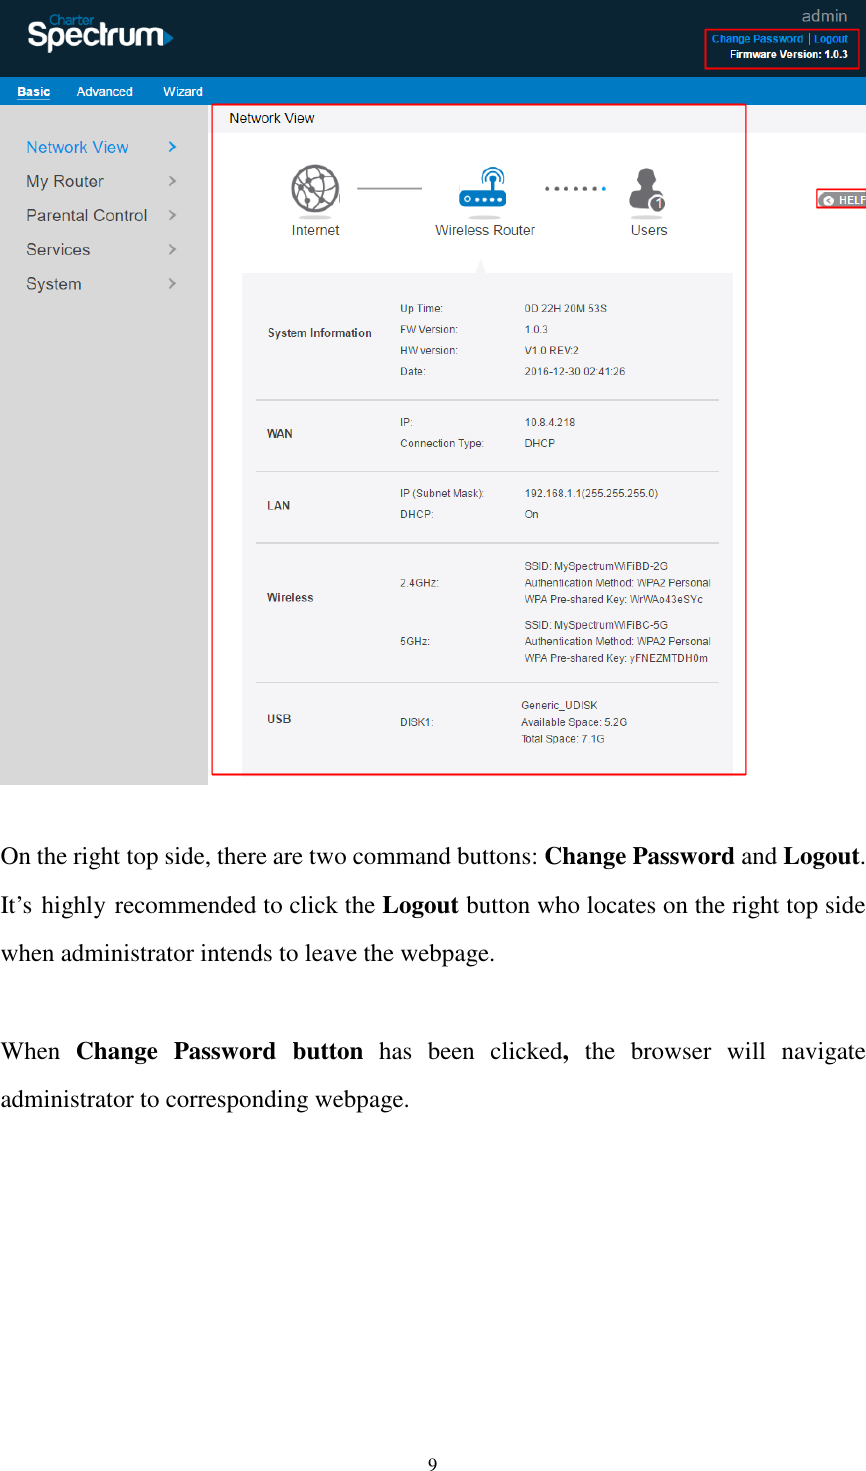  9   On the right top side, there are two command buttons: Change Password and Logout. It’s highly recommended to click the Logout button who locates on the right top side when administrator intends to leave the webpage.  When  Change  Password  button  has  been  clicked,  the  browser  will  navigate administrator to corresponding webpage. 